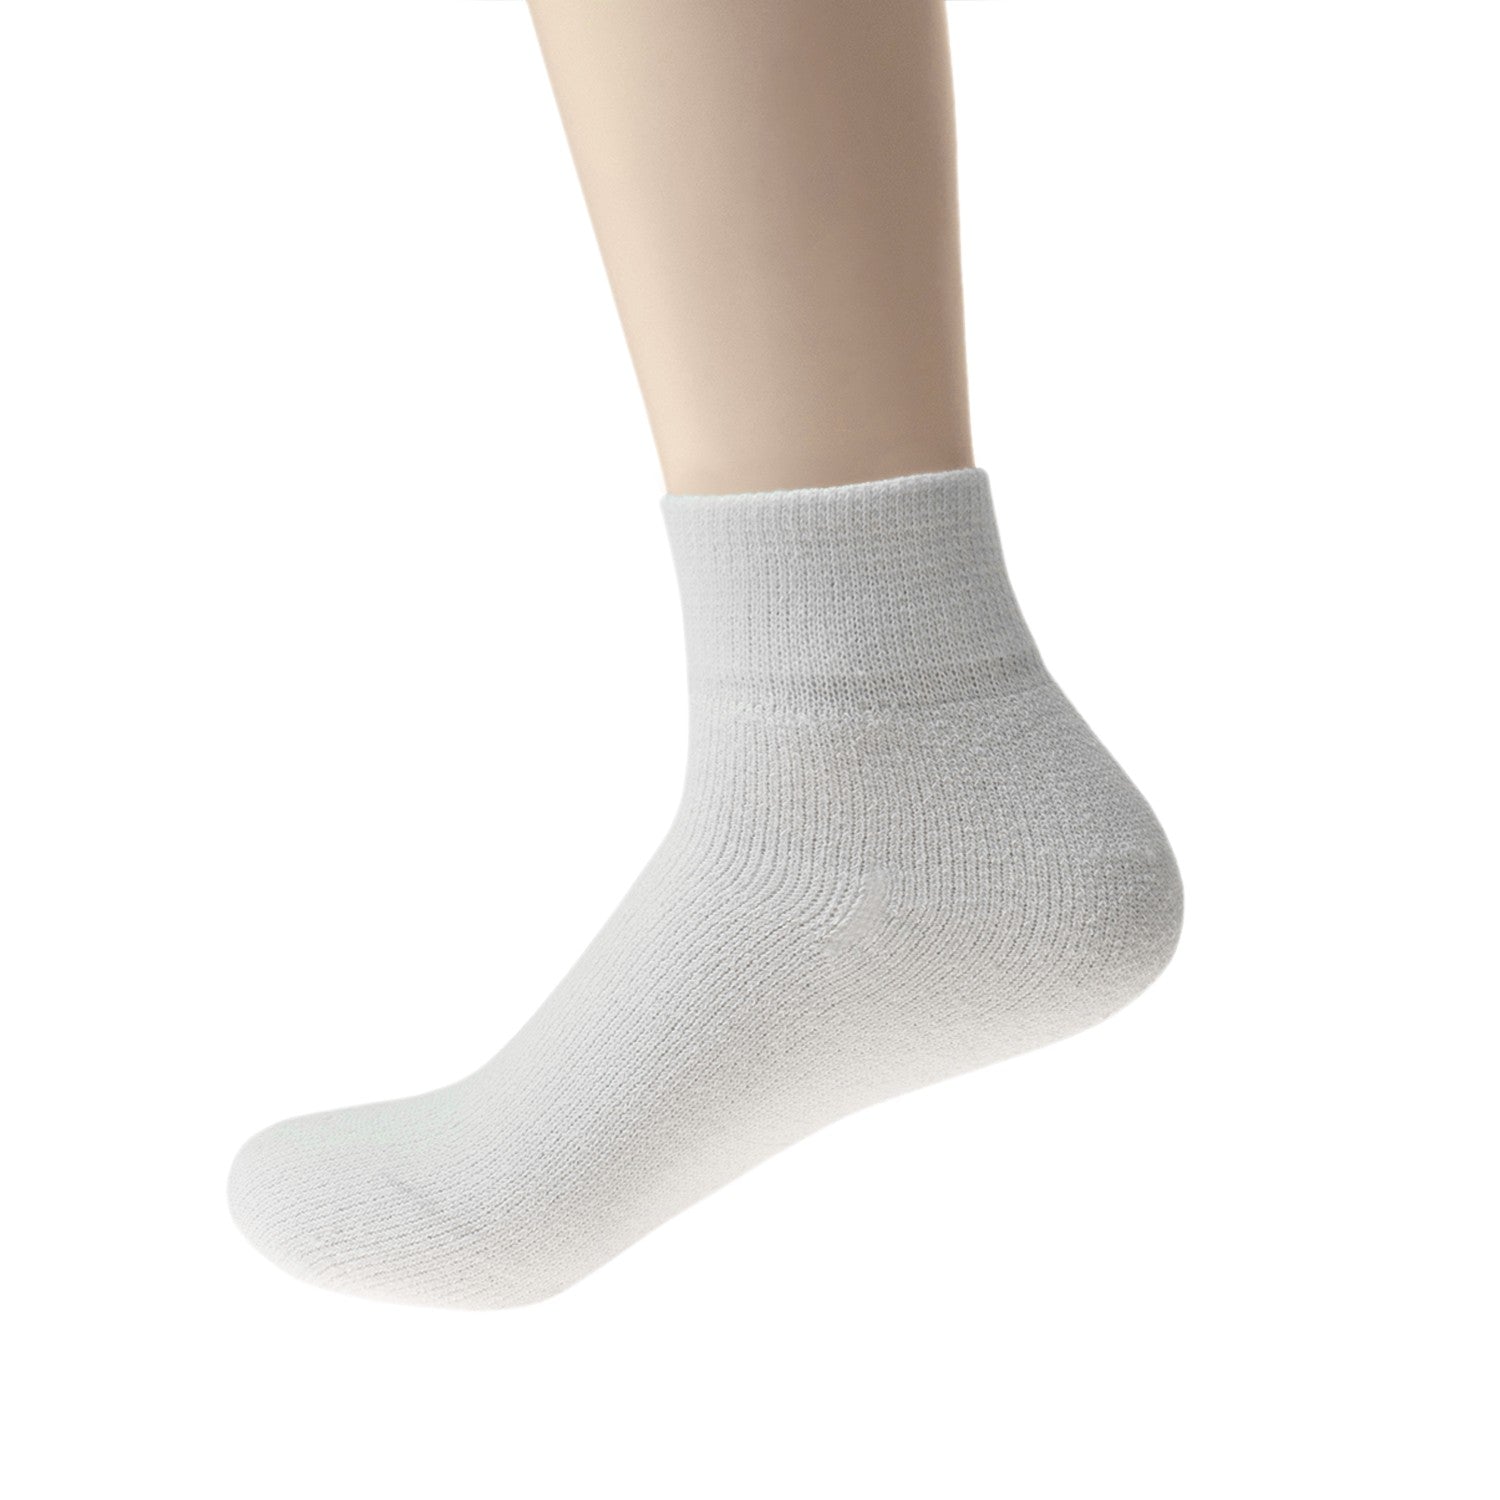 Wholesale Socks Men's Ankle Cut Athletic Size 10-13 in White - Bulk Case of 120 Pairs